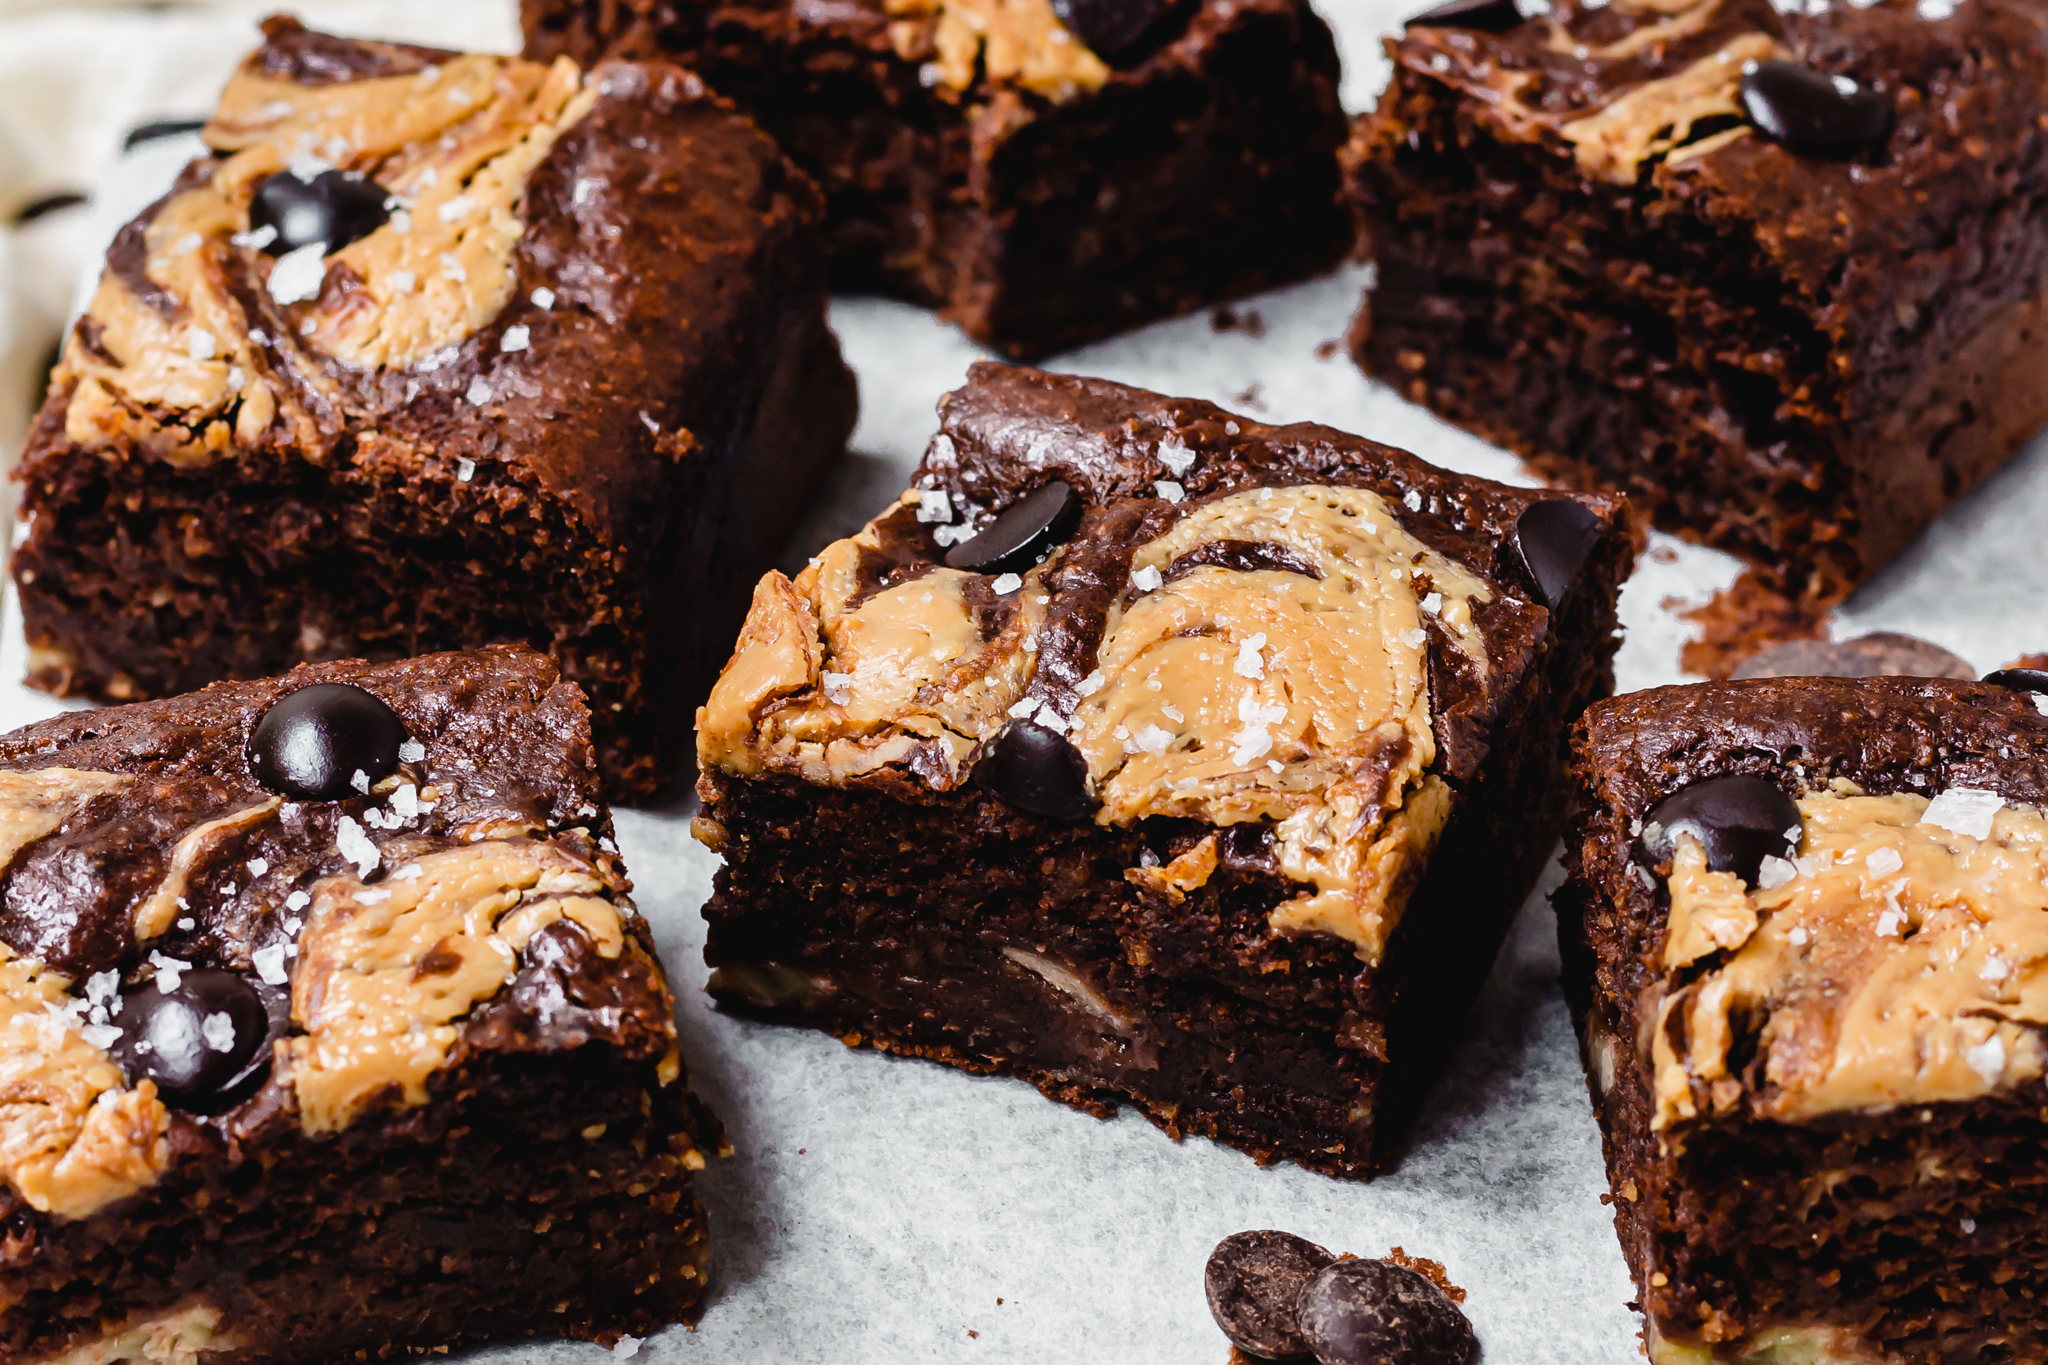 Landscape close up photo of Chocolate Banana Bread Peanut Butter Brownies